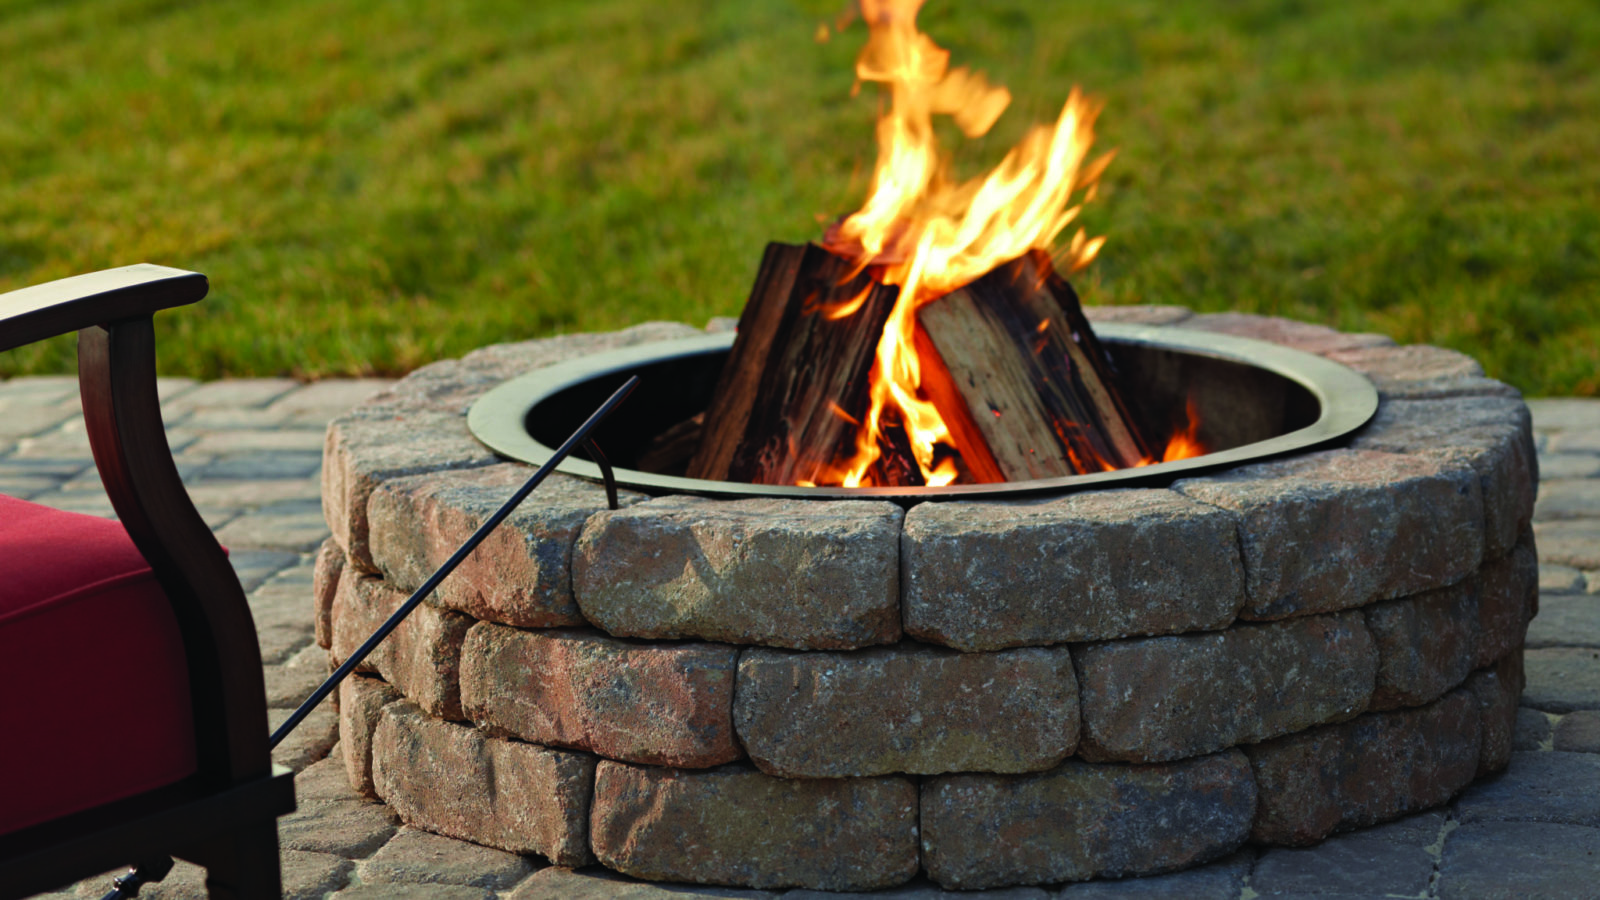 Gas Vs Wood Fire Pit Pros And Cons, Fire Pit Charcoal Vs Wood